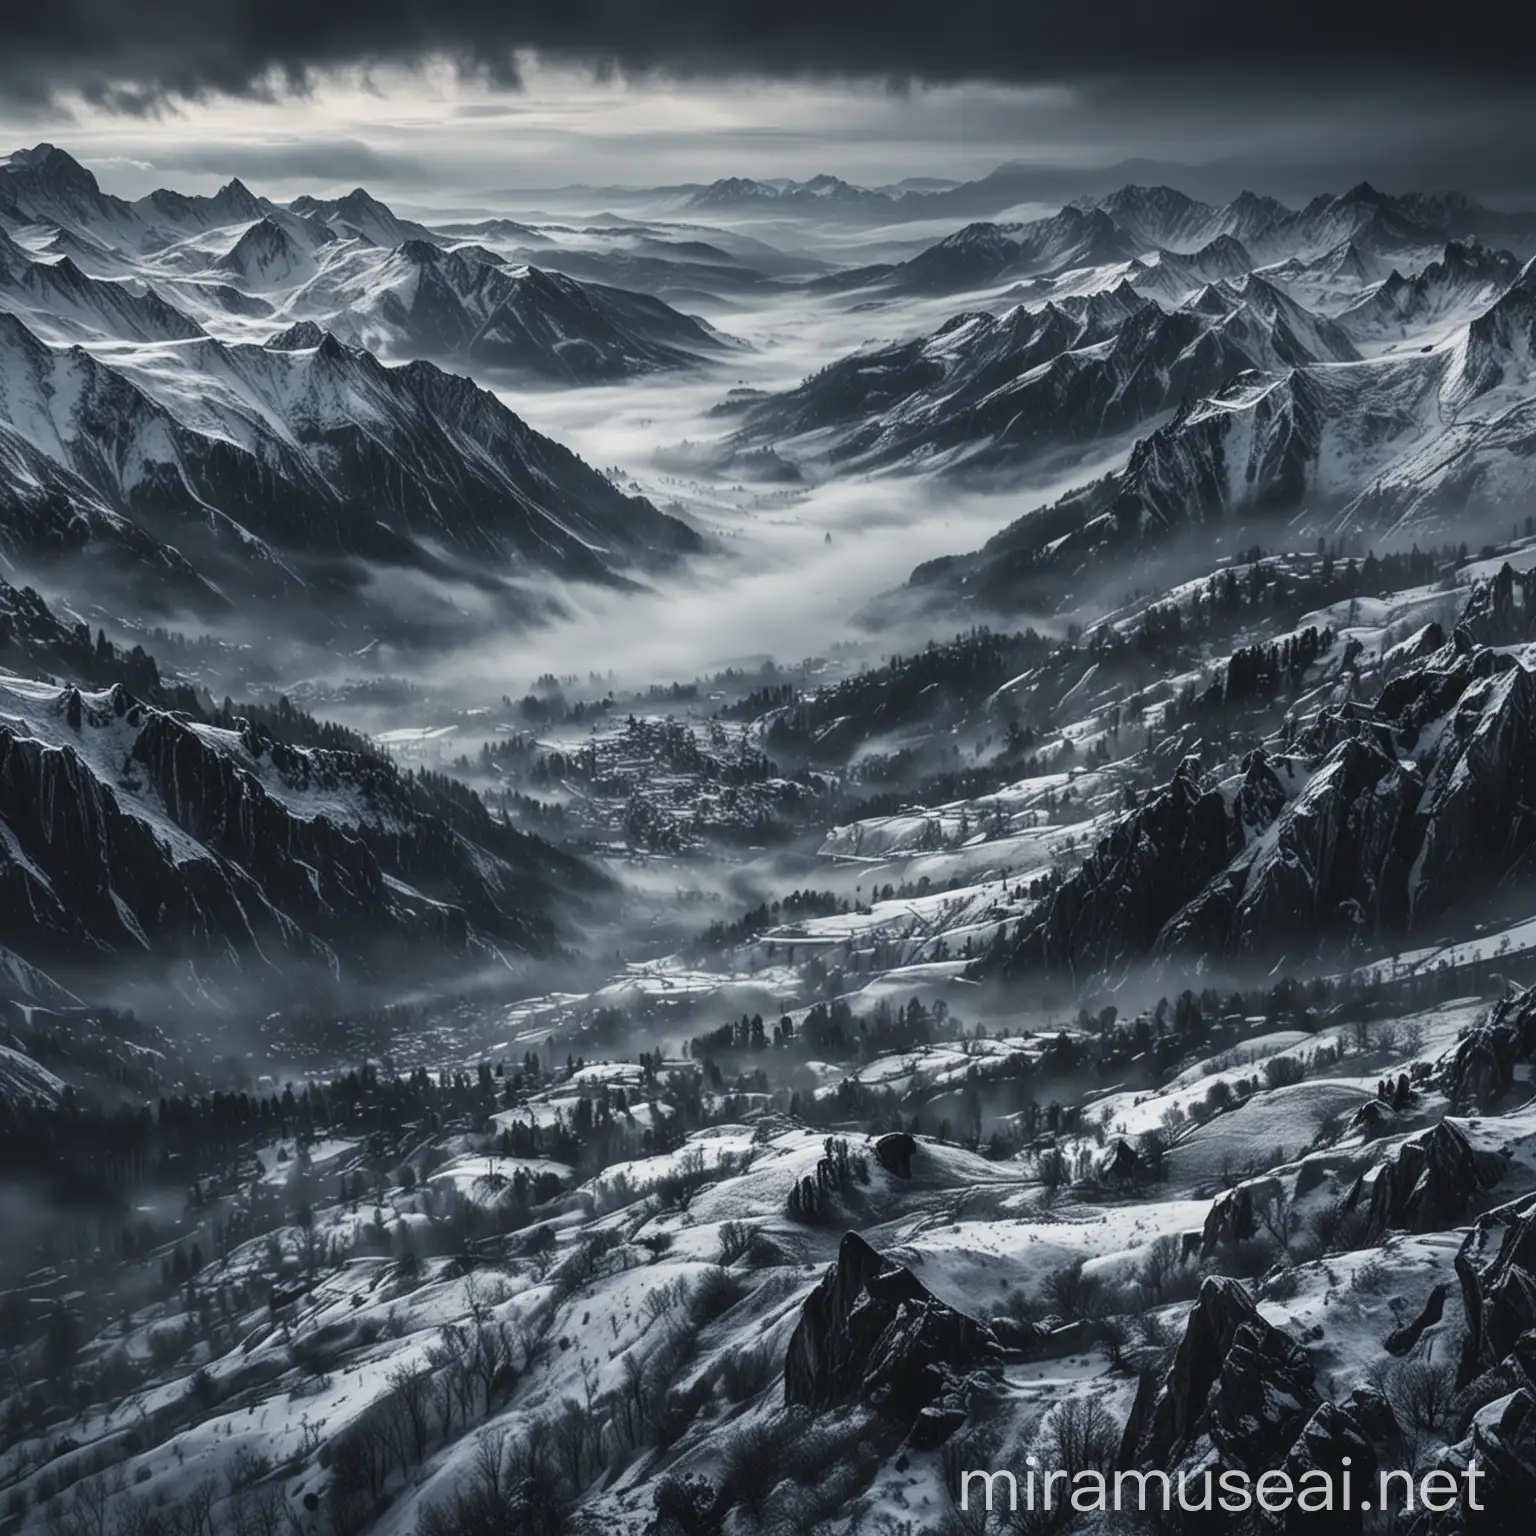 Dramatic Landscape Photography of SnowCovered Mountains in Dark Weather